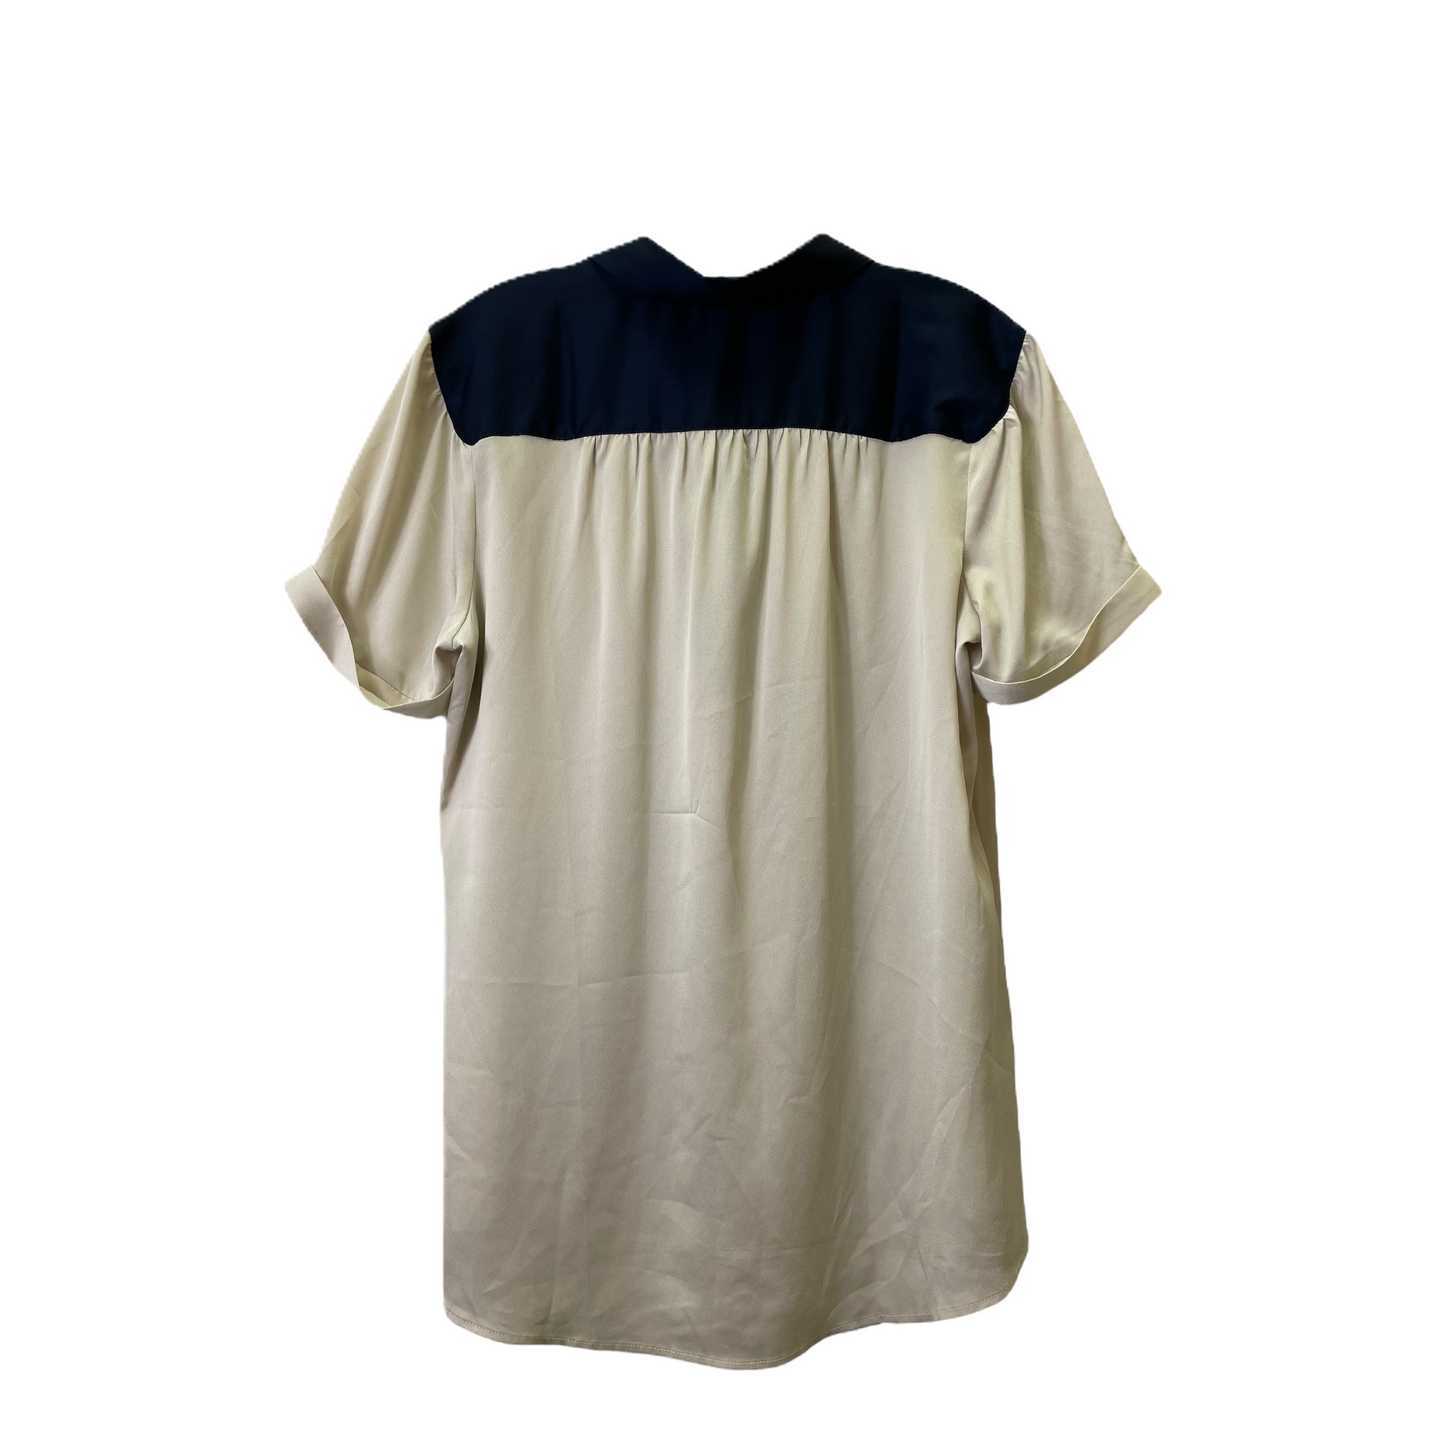 Taupe Top Short Sleeve By Ann Taylor, Size: L